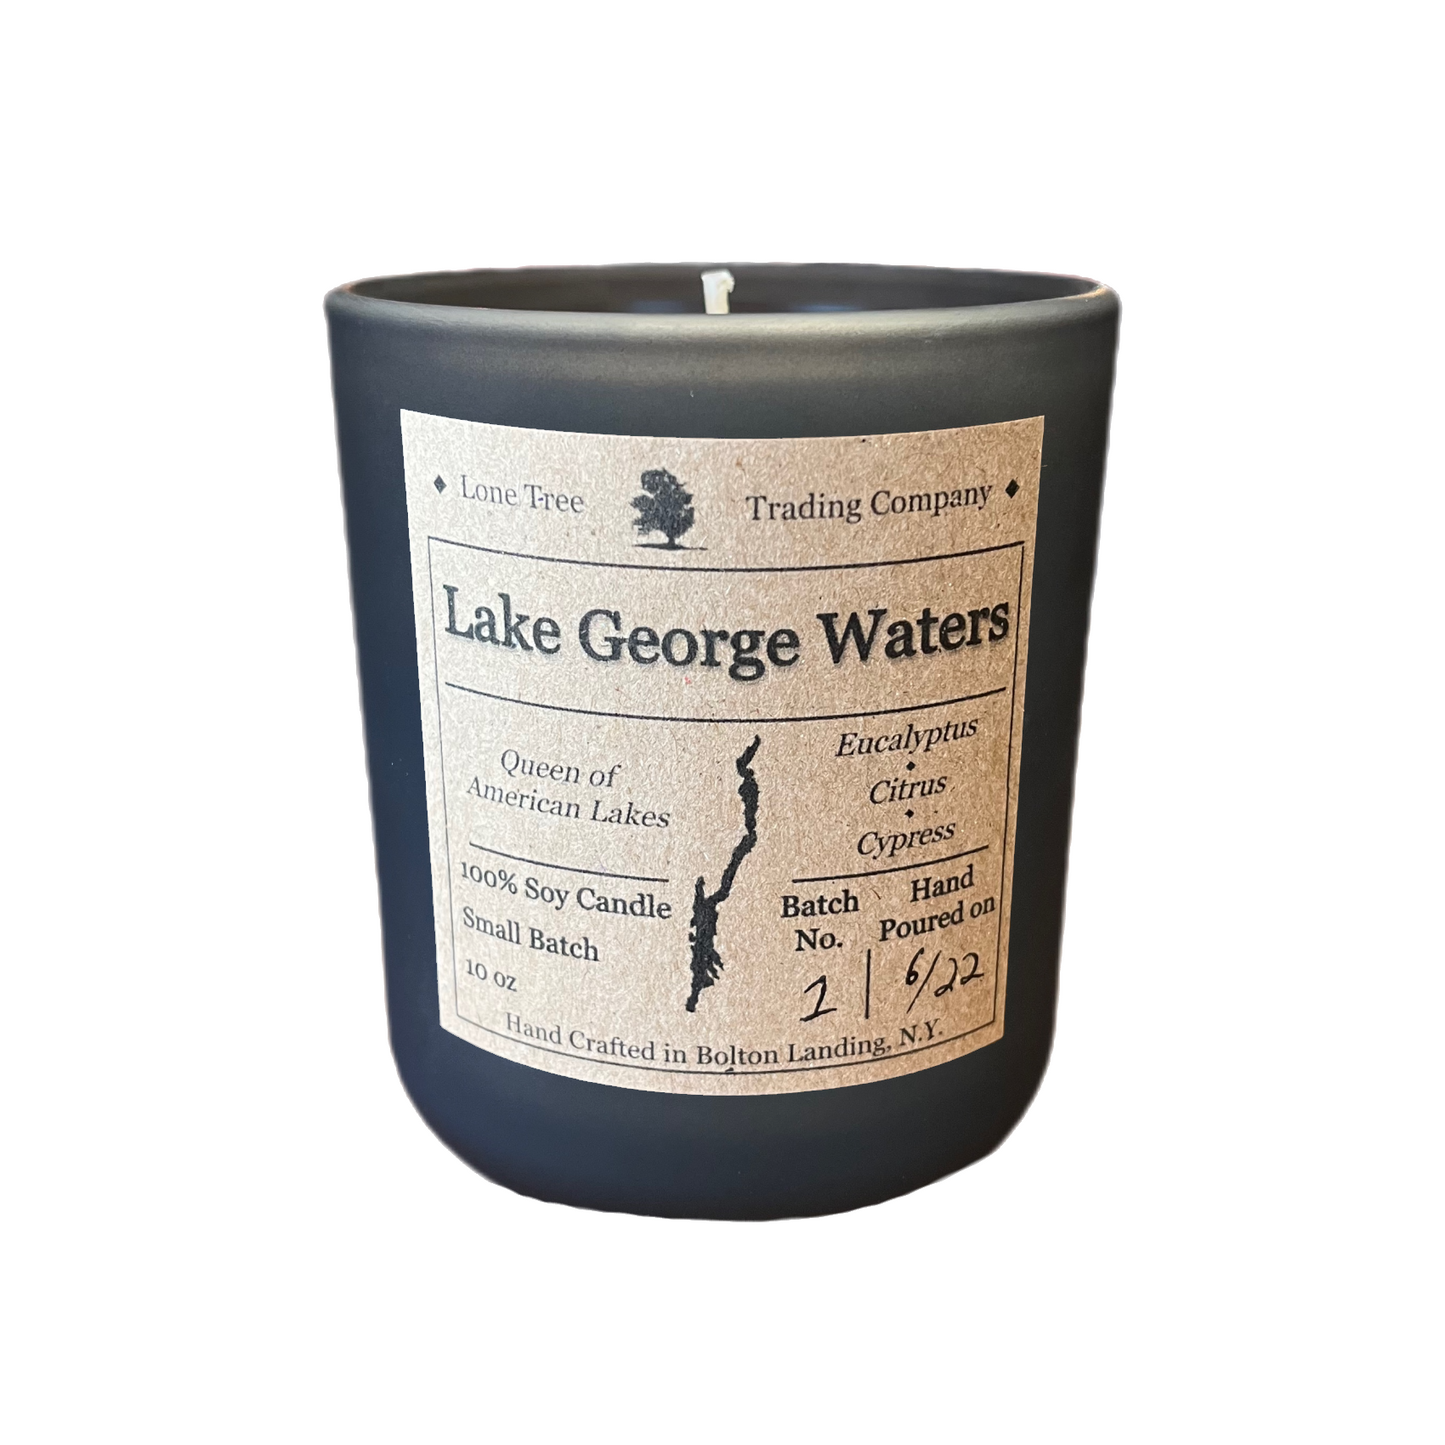 Lake George Waters Soy Candle